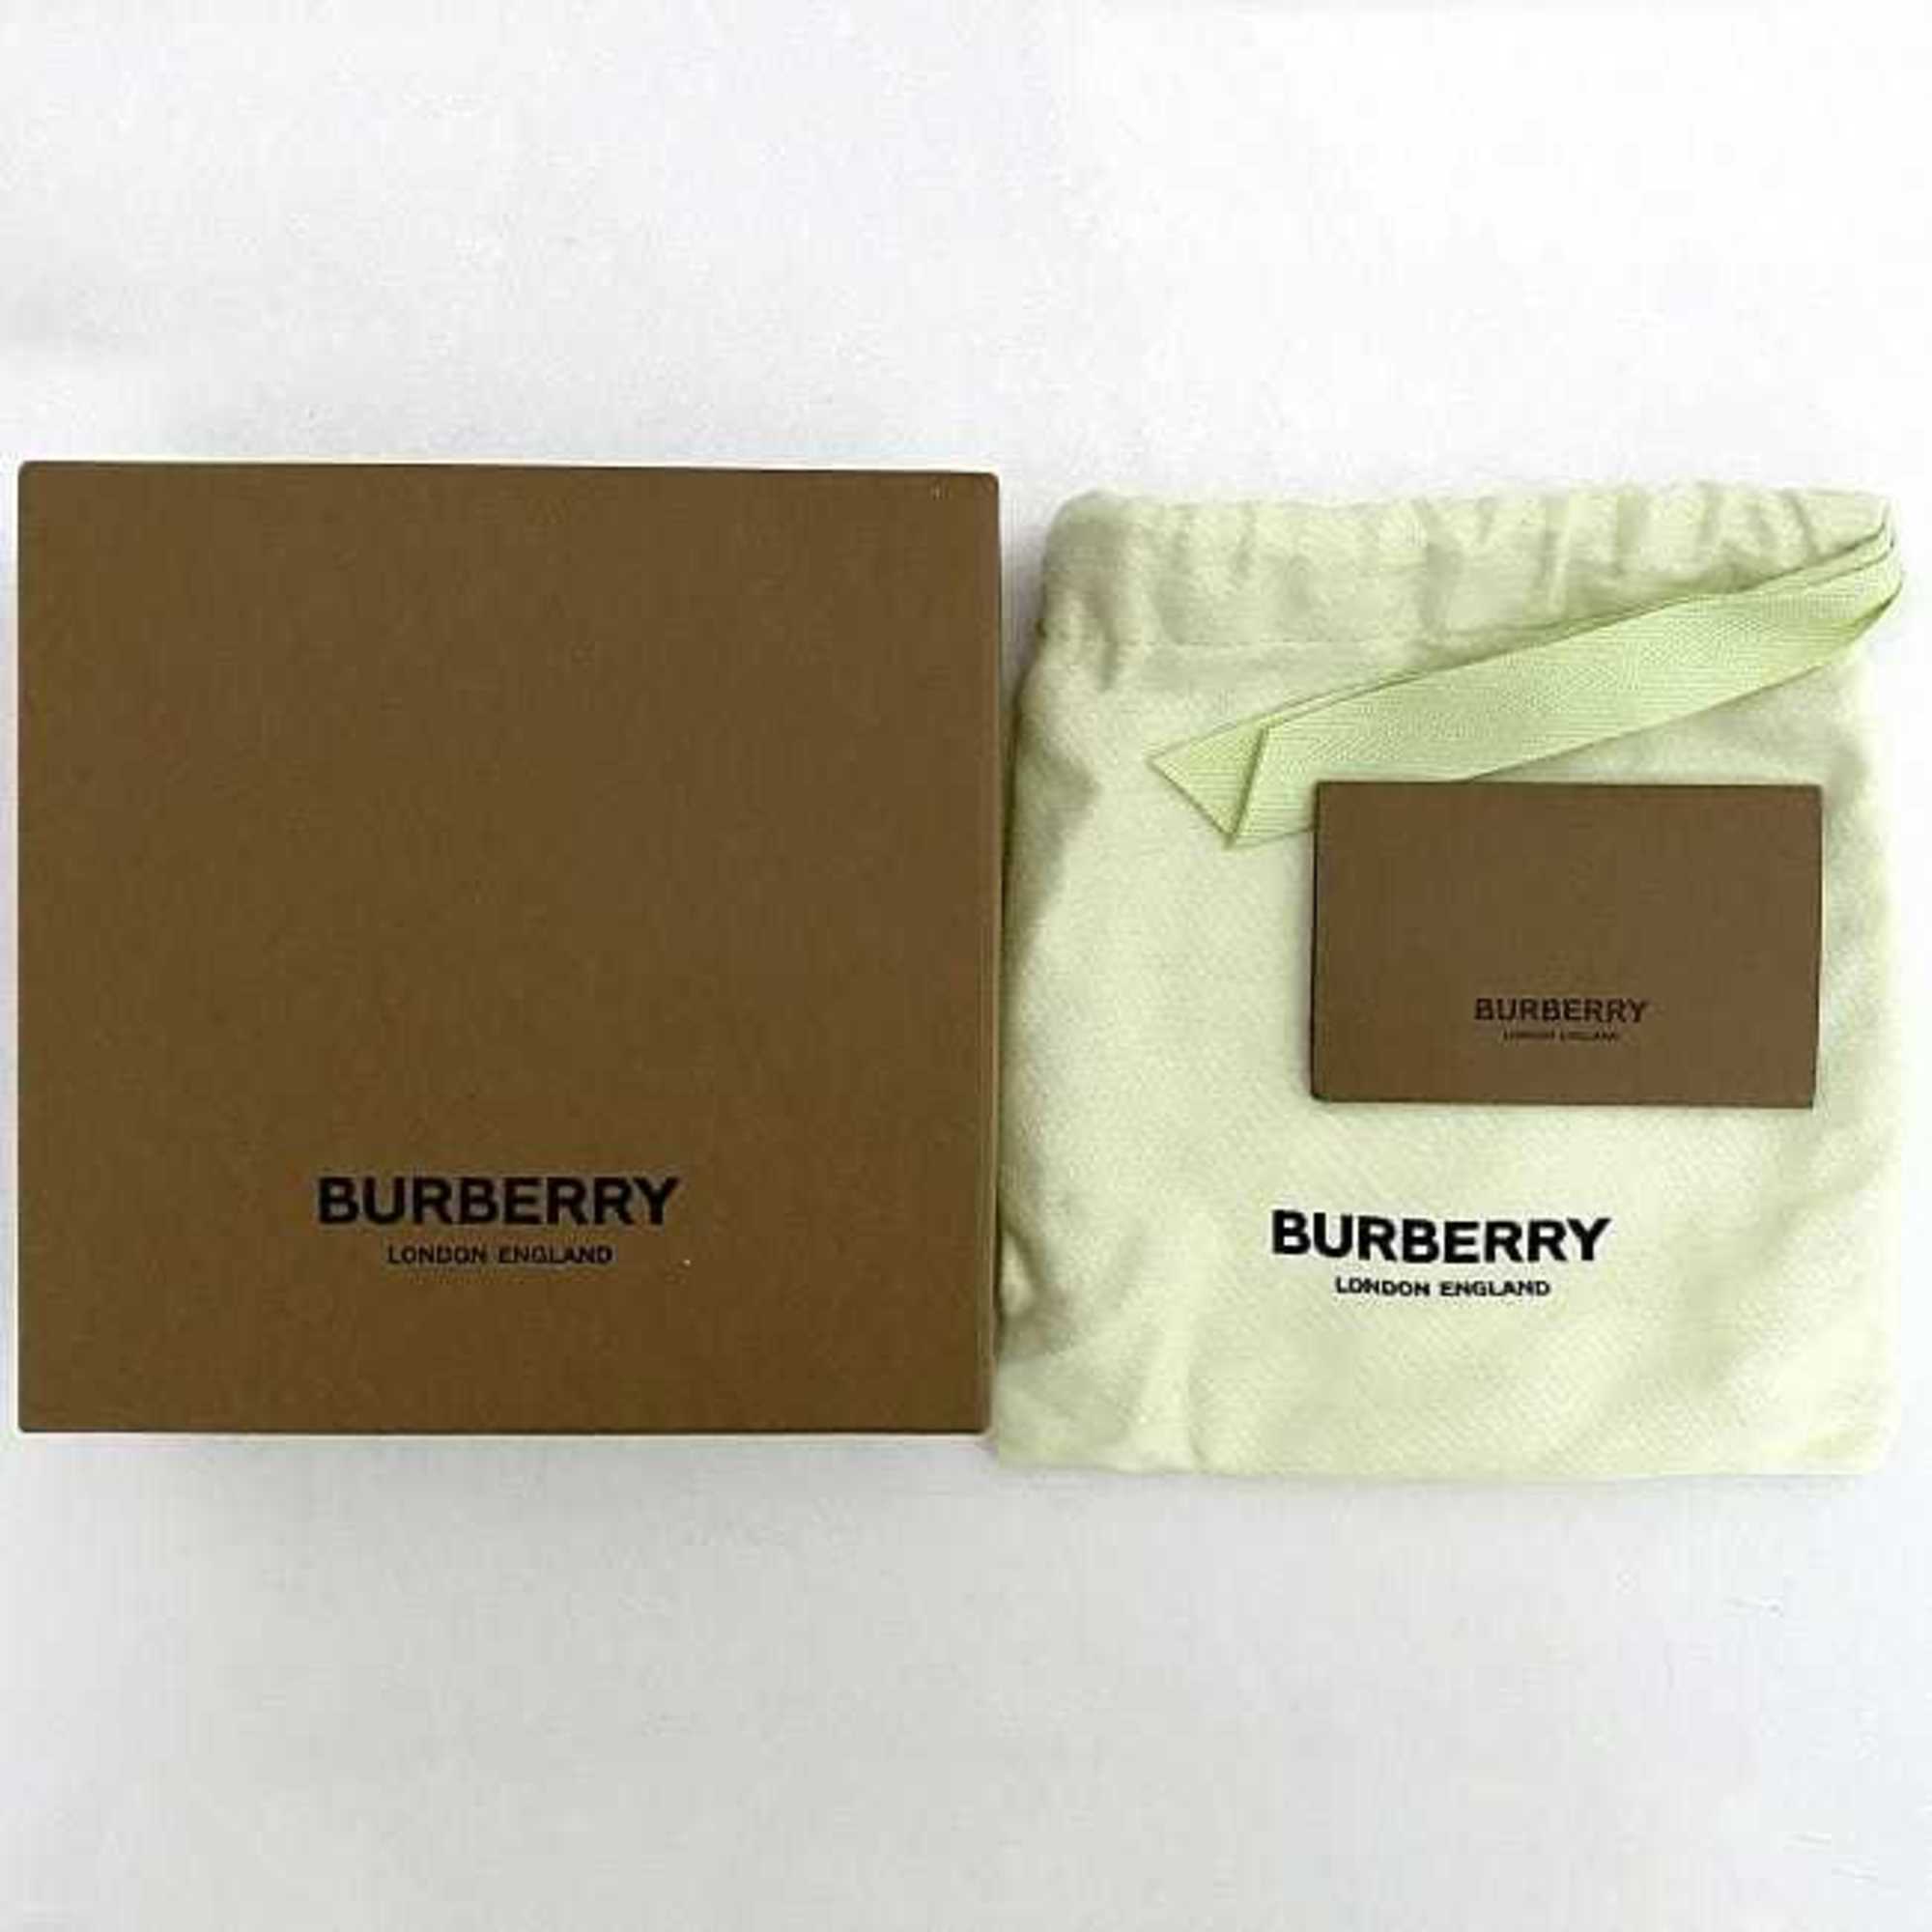 Burberry waist belt black check f-20072 leather BURBERRY square buckle 40mm long